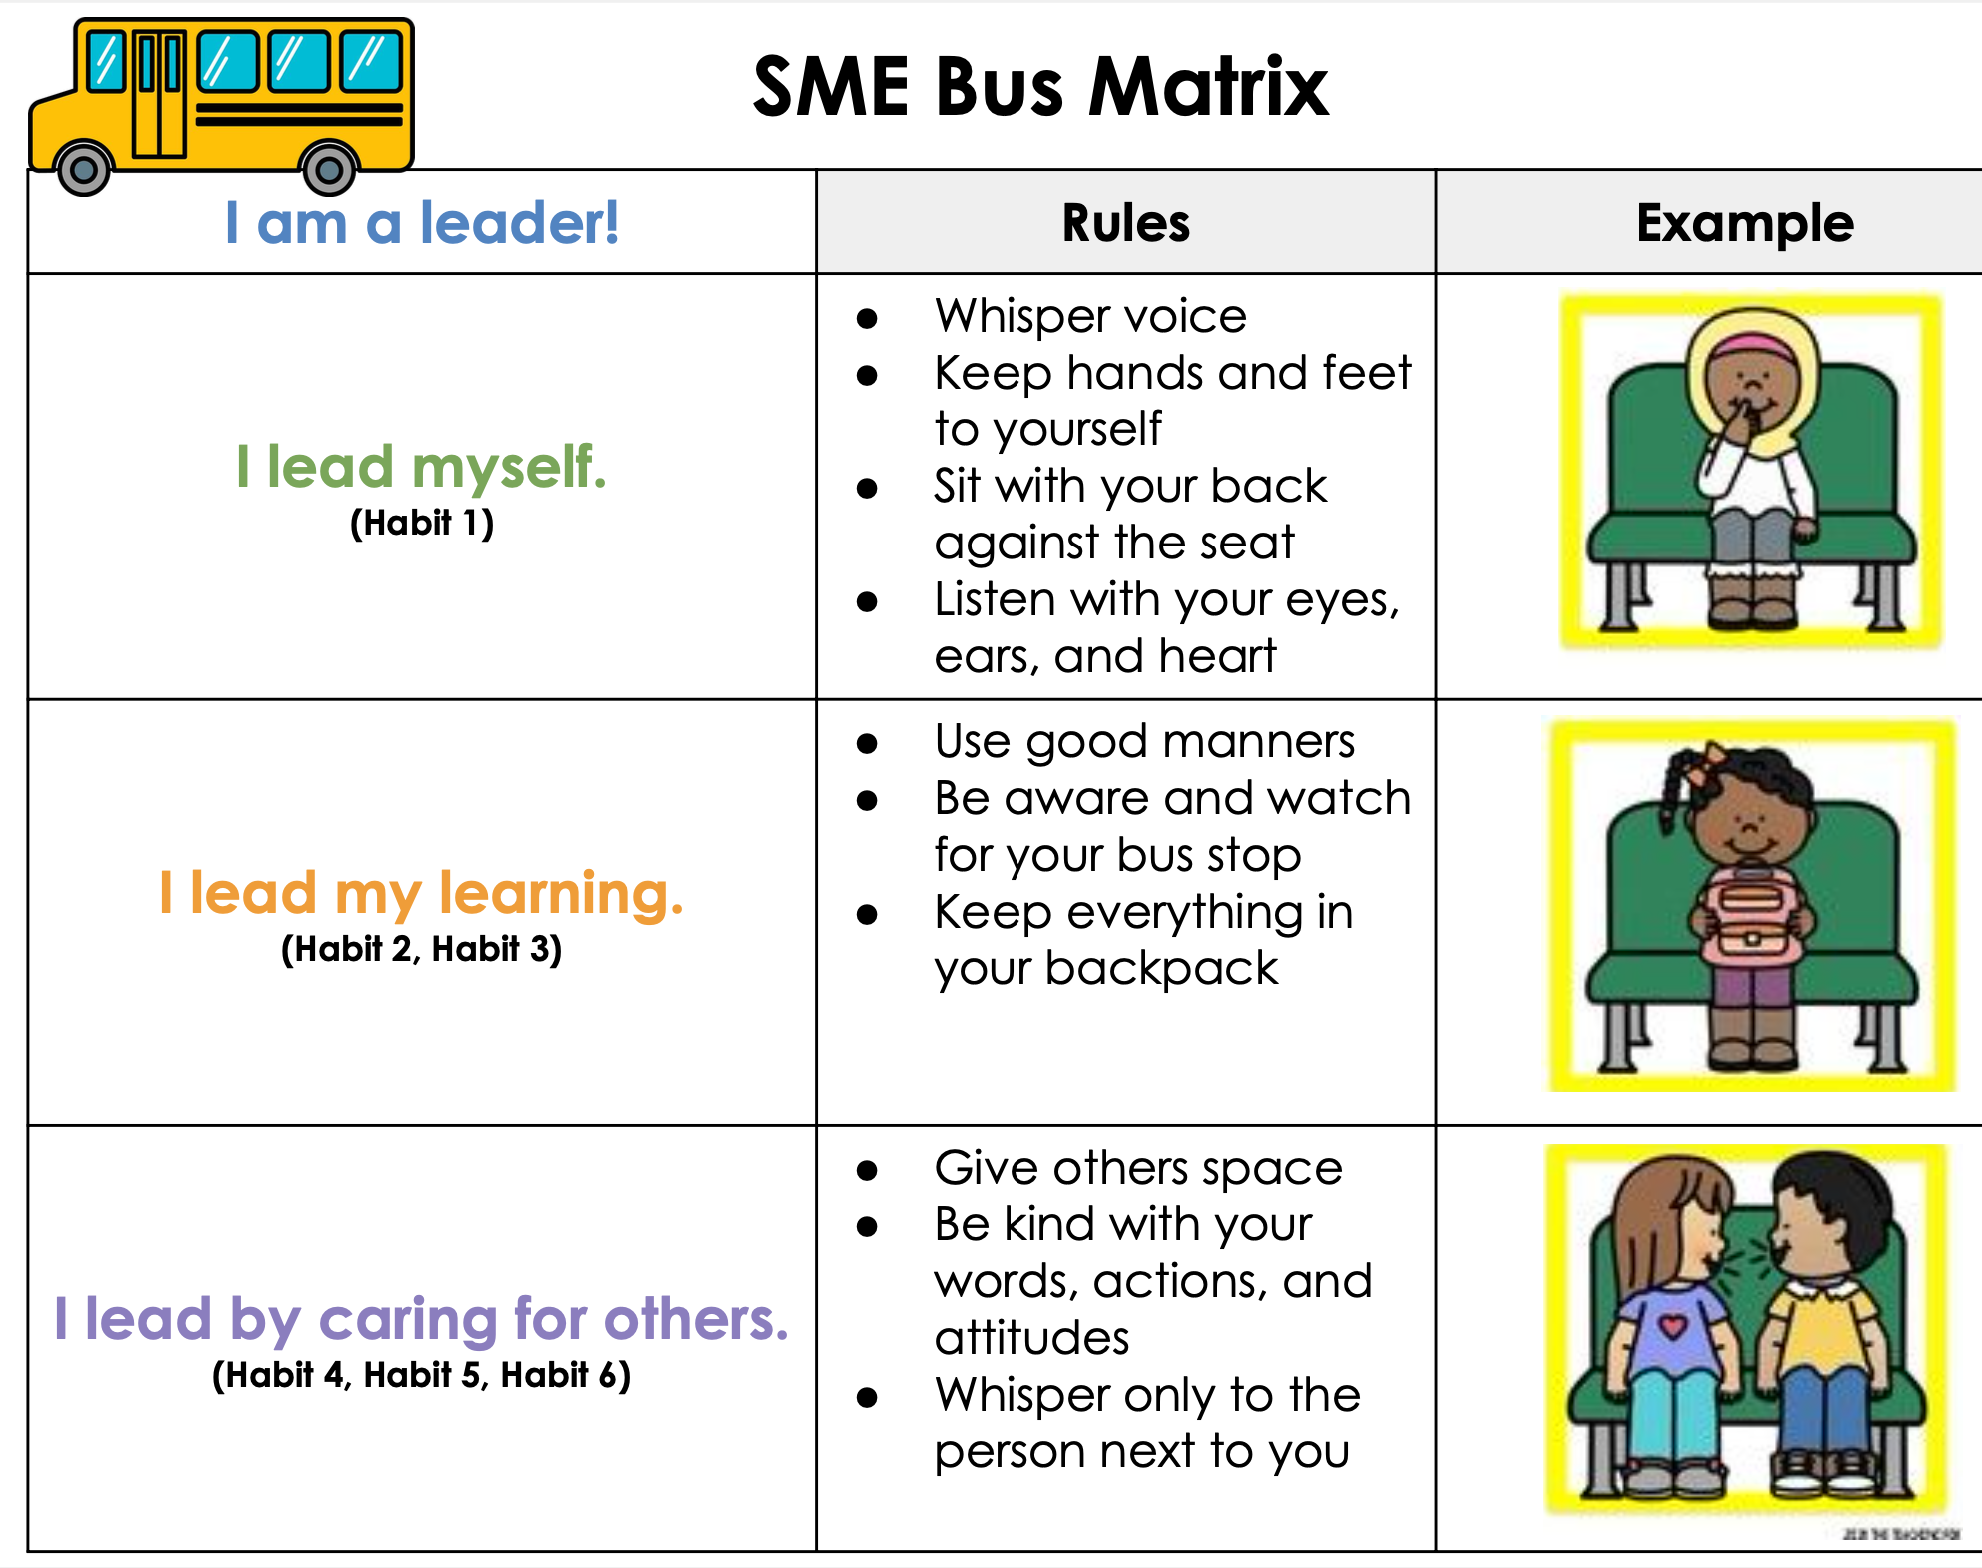 Bus Matrix for South Mebane Elementary Explains bus expectations and safety measures